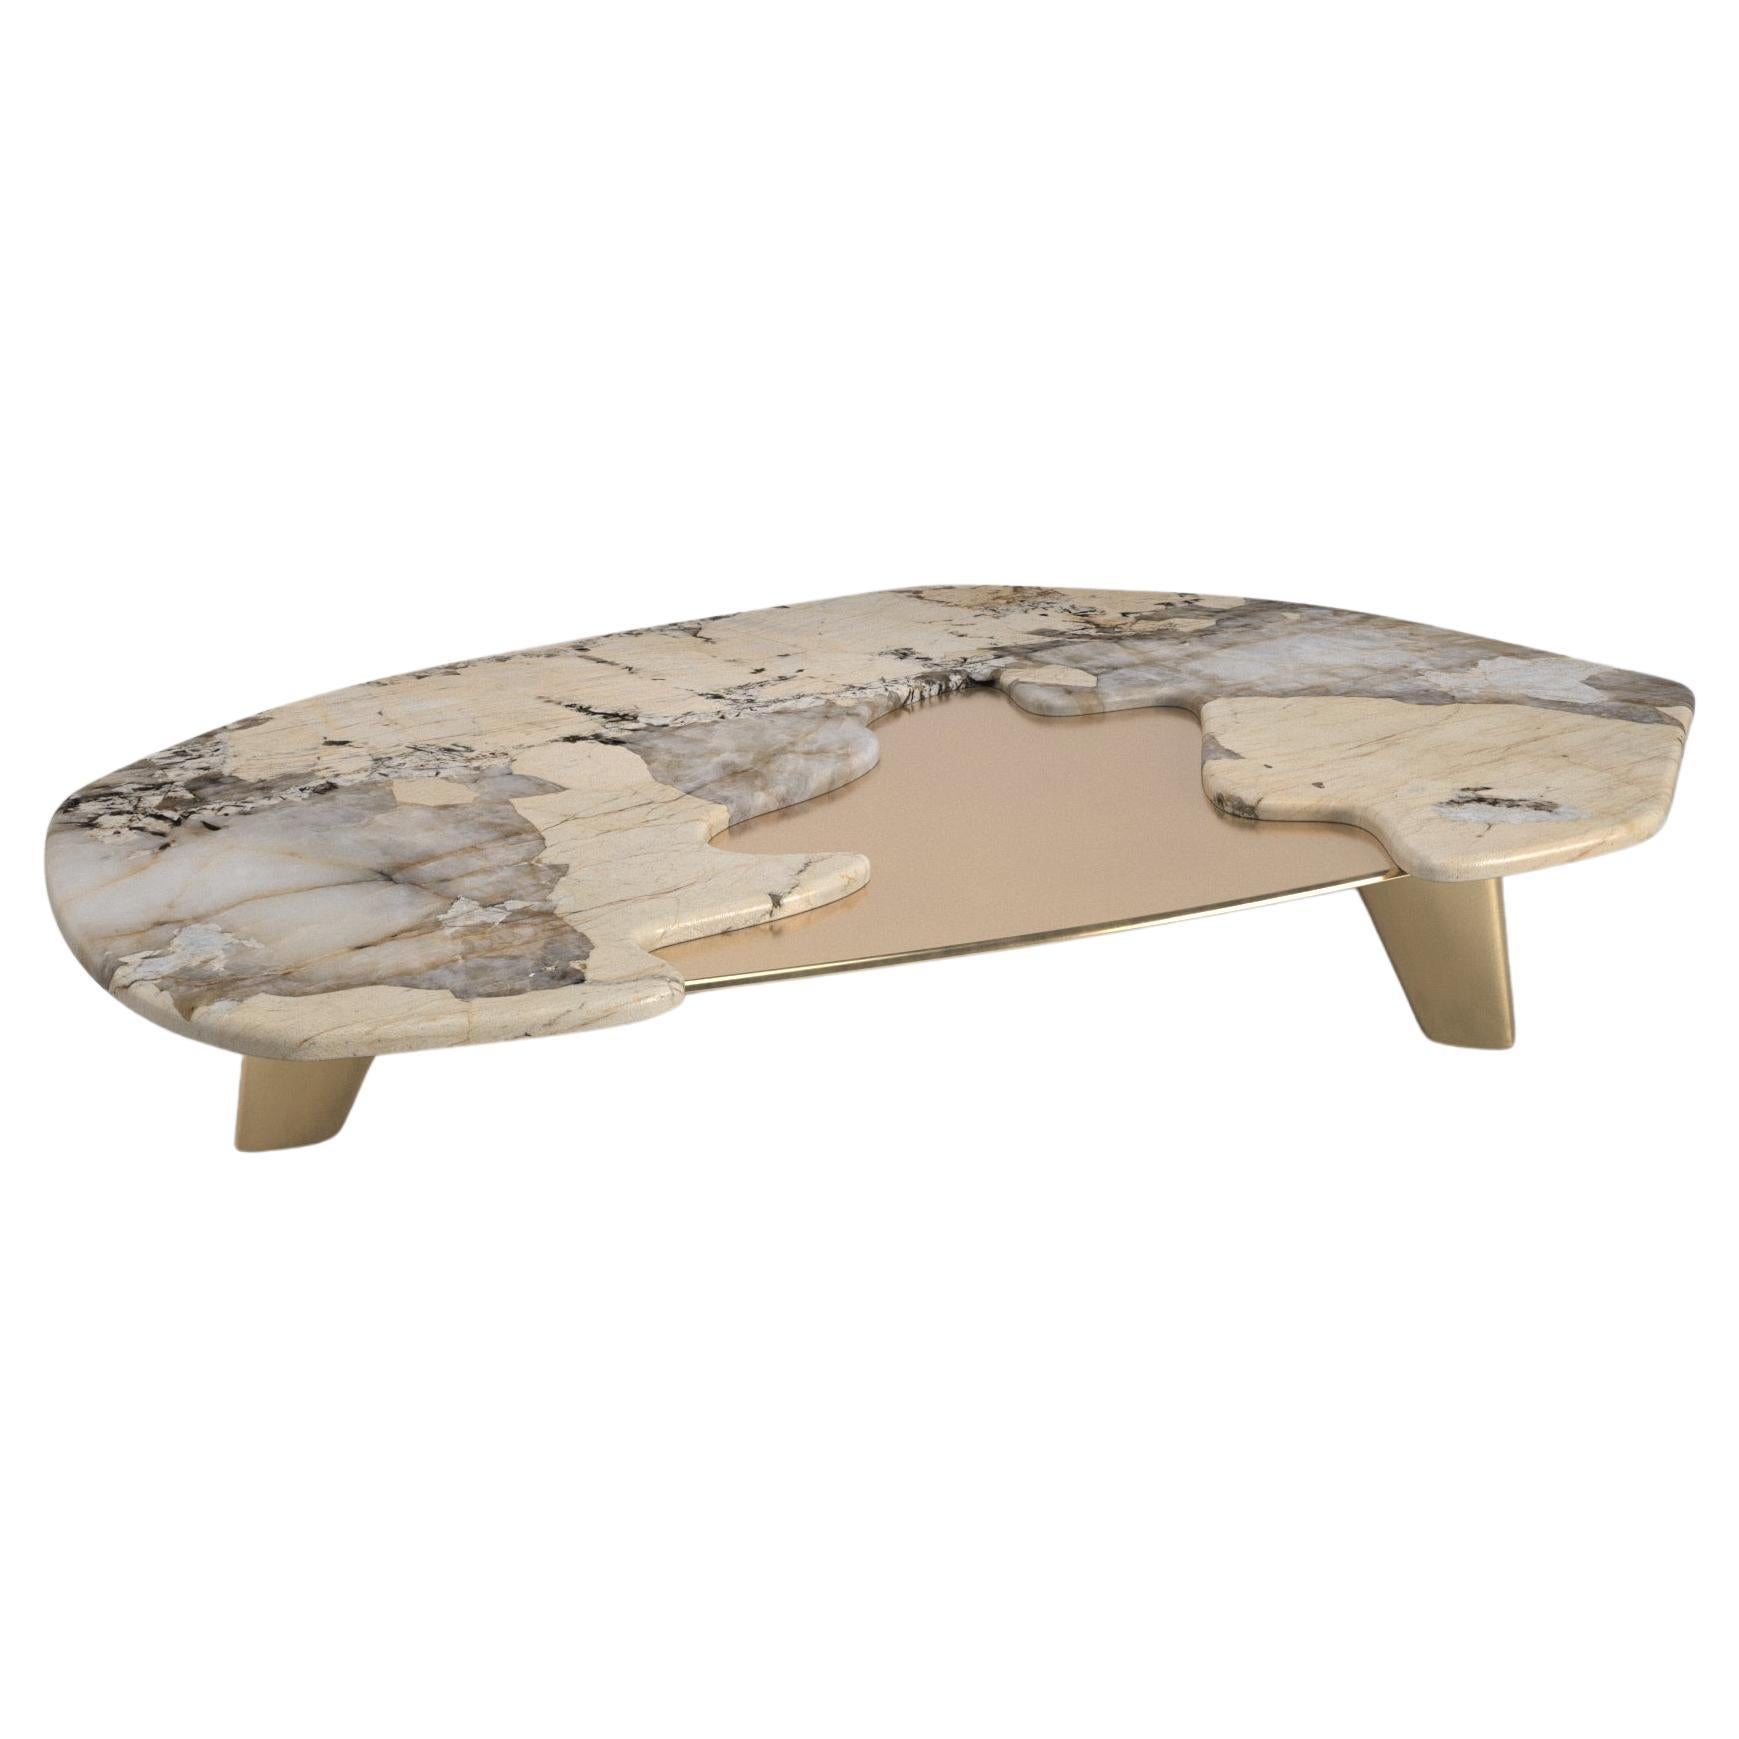 Elements IV Coffee Table, 1 of 1 by Grzegorz Majka For Sale